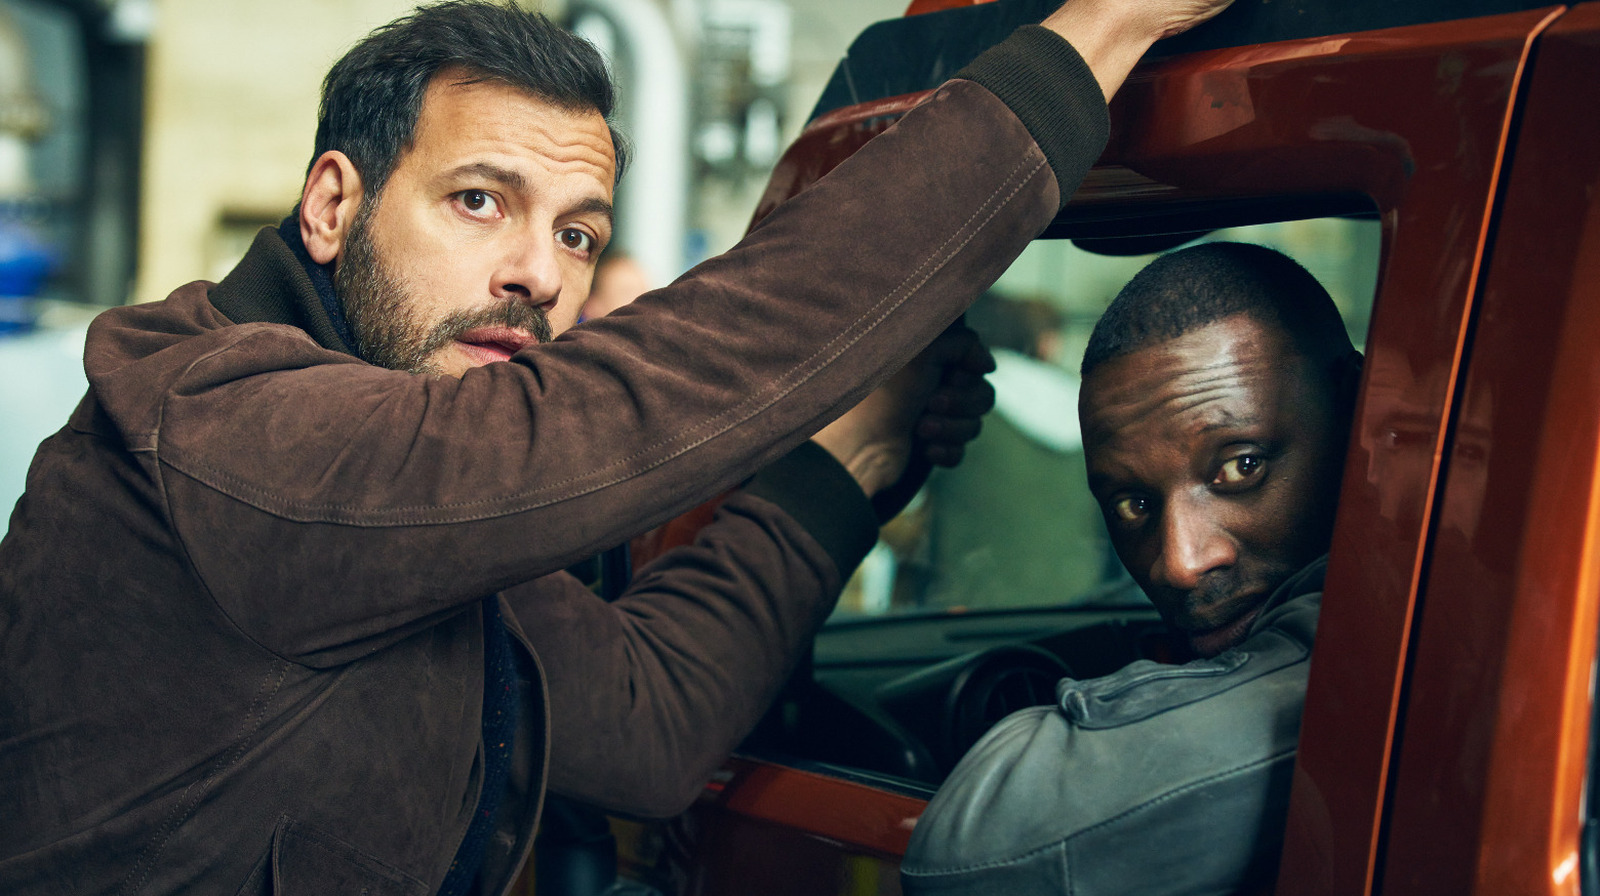 Trailer Released for Netflix's French Action-Comedy “The Takedown”